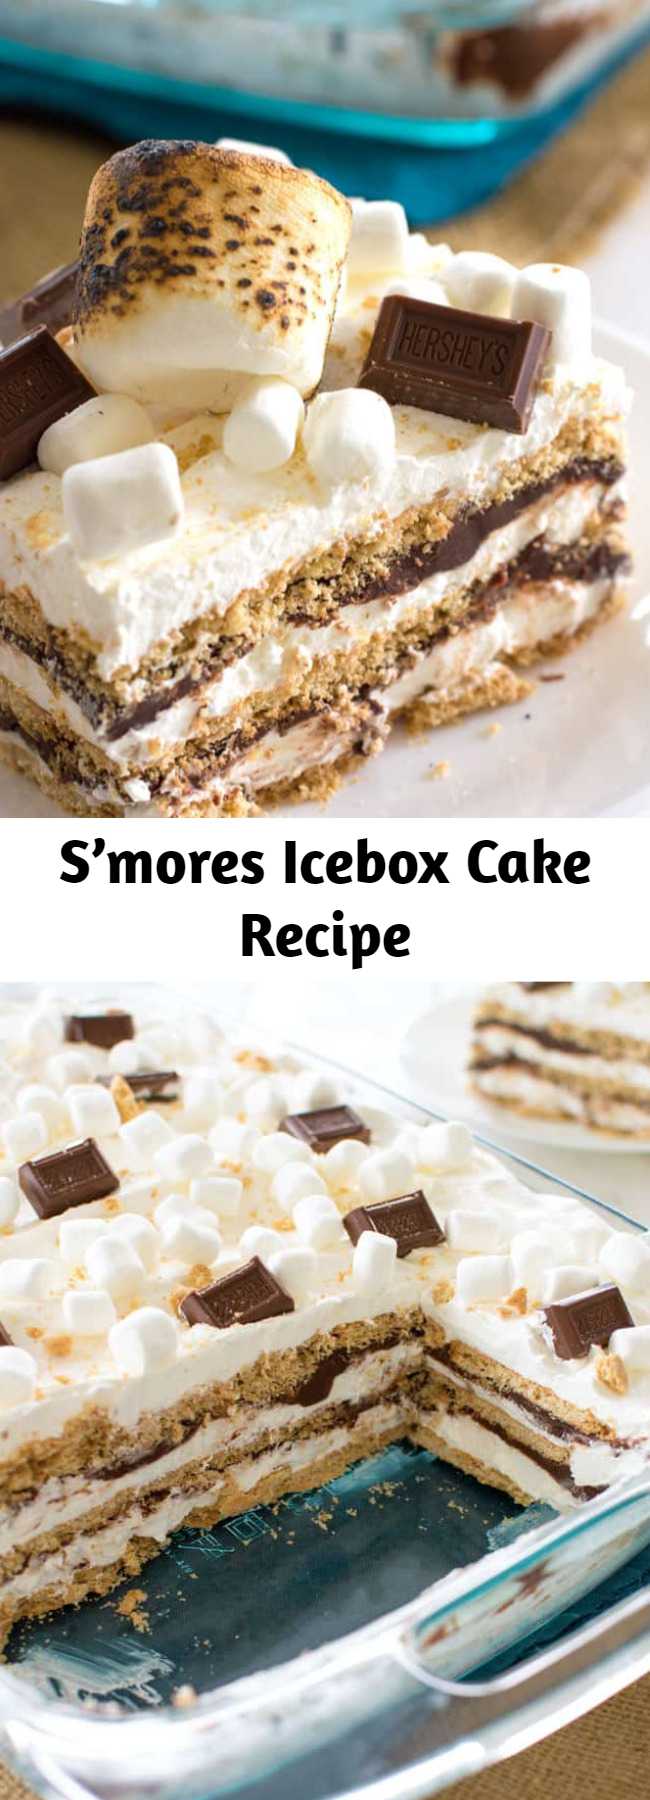 Bring the s’mores indoors with this S’mores Icebox Cake to feed a crowd. With layers of graham crackers, marshmallow whipped cream, and chocolate ganache I guarantee everyone will be clamoring for s’more! #smores #hersheys #iceboxcake #cake #summer #dessert #marshmallows